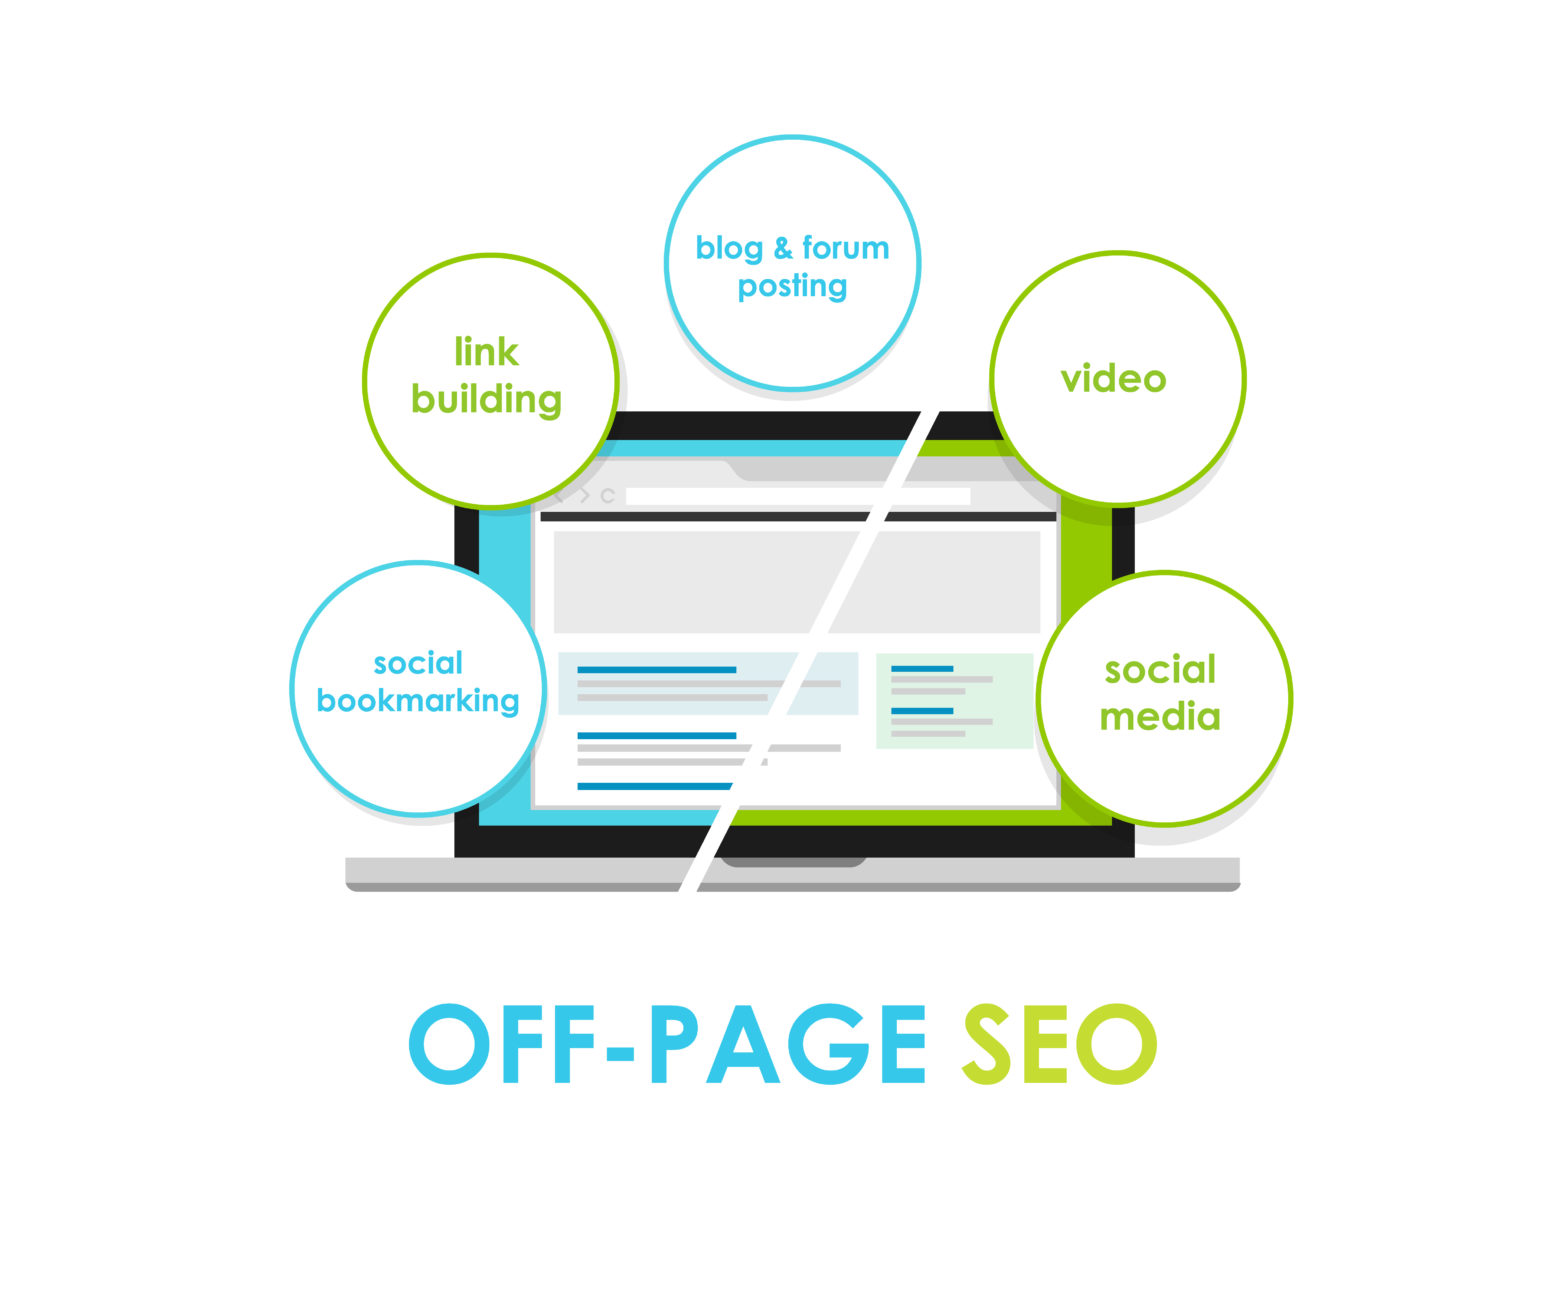 SEO Off page